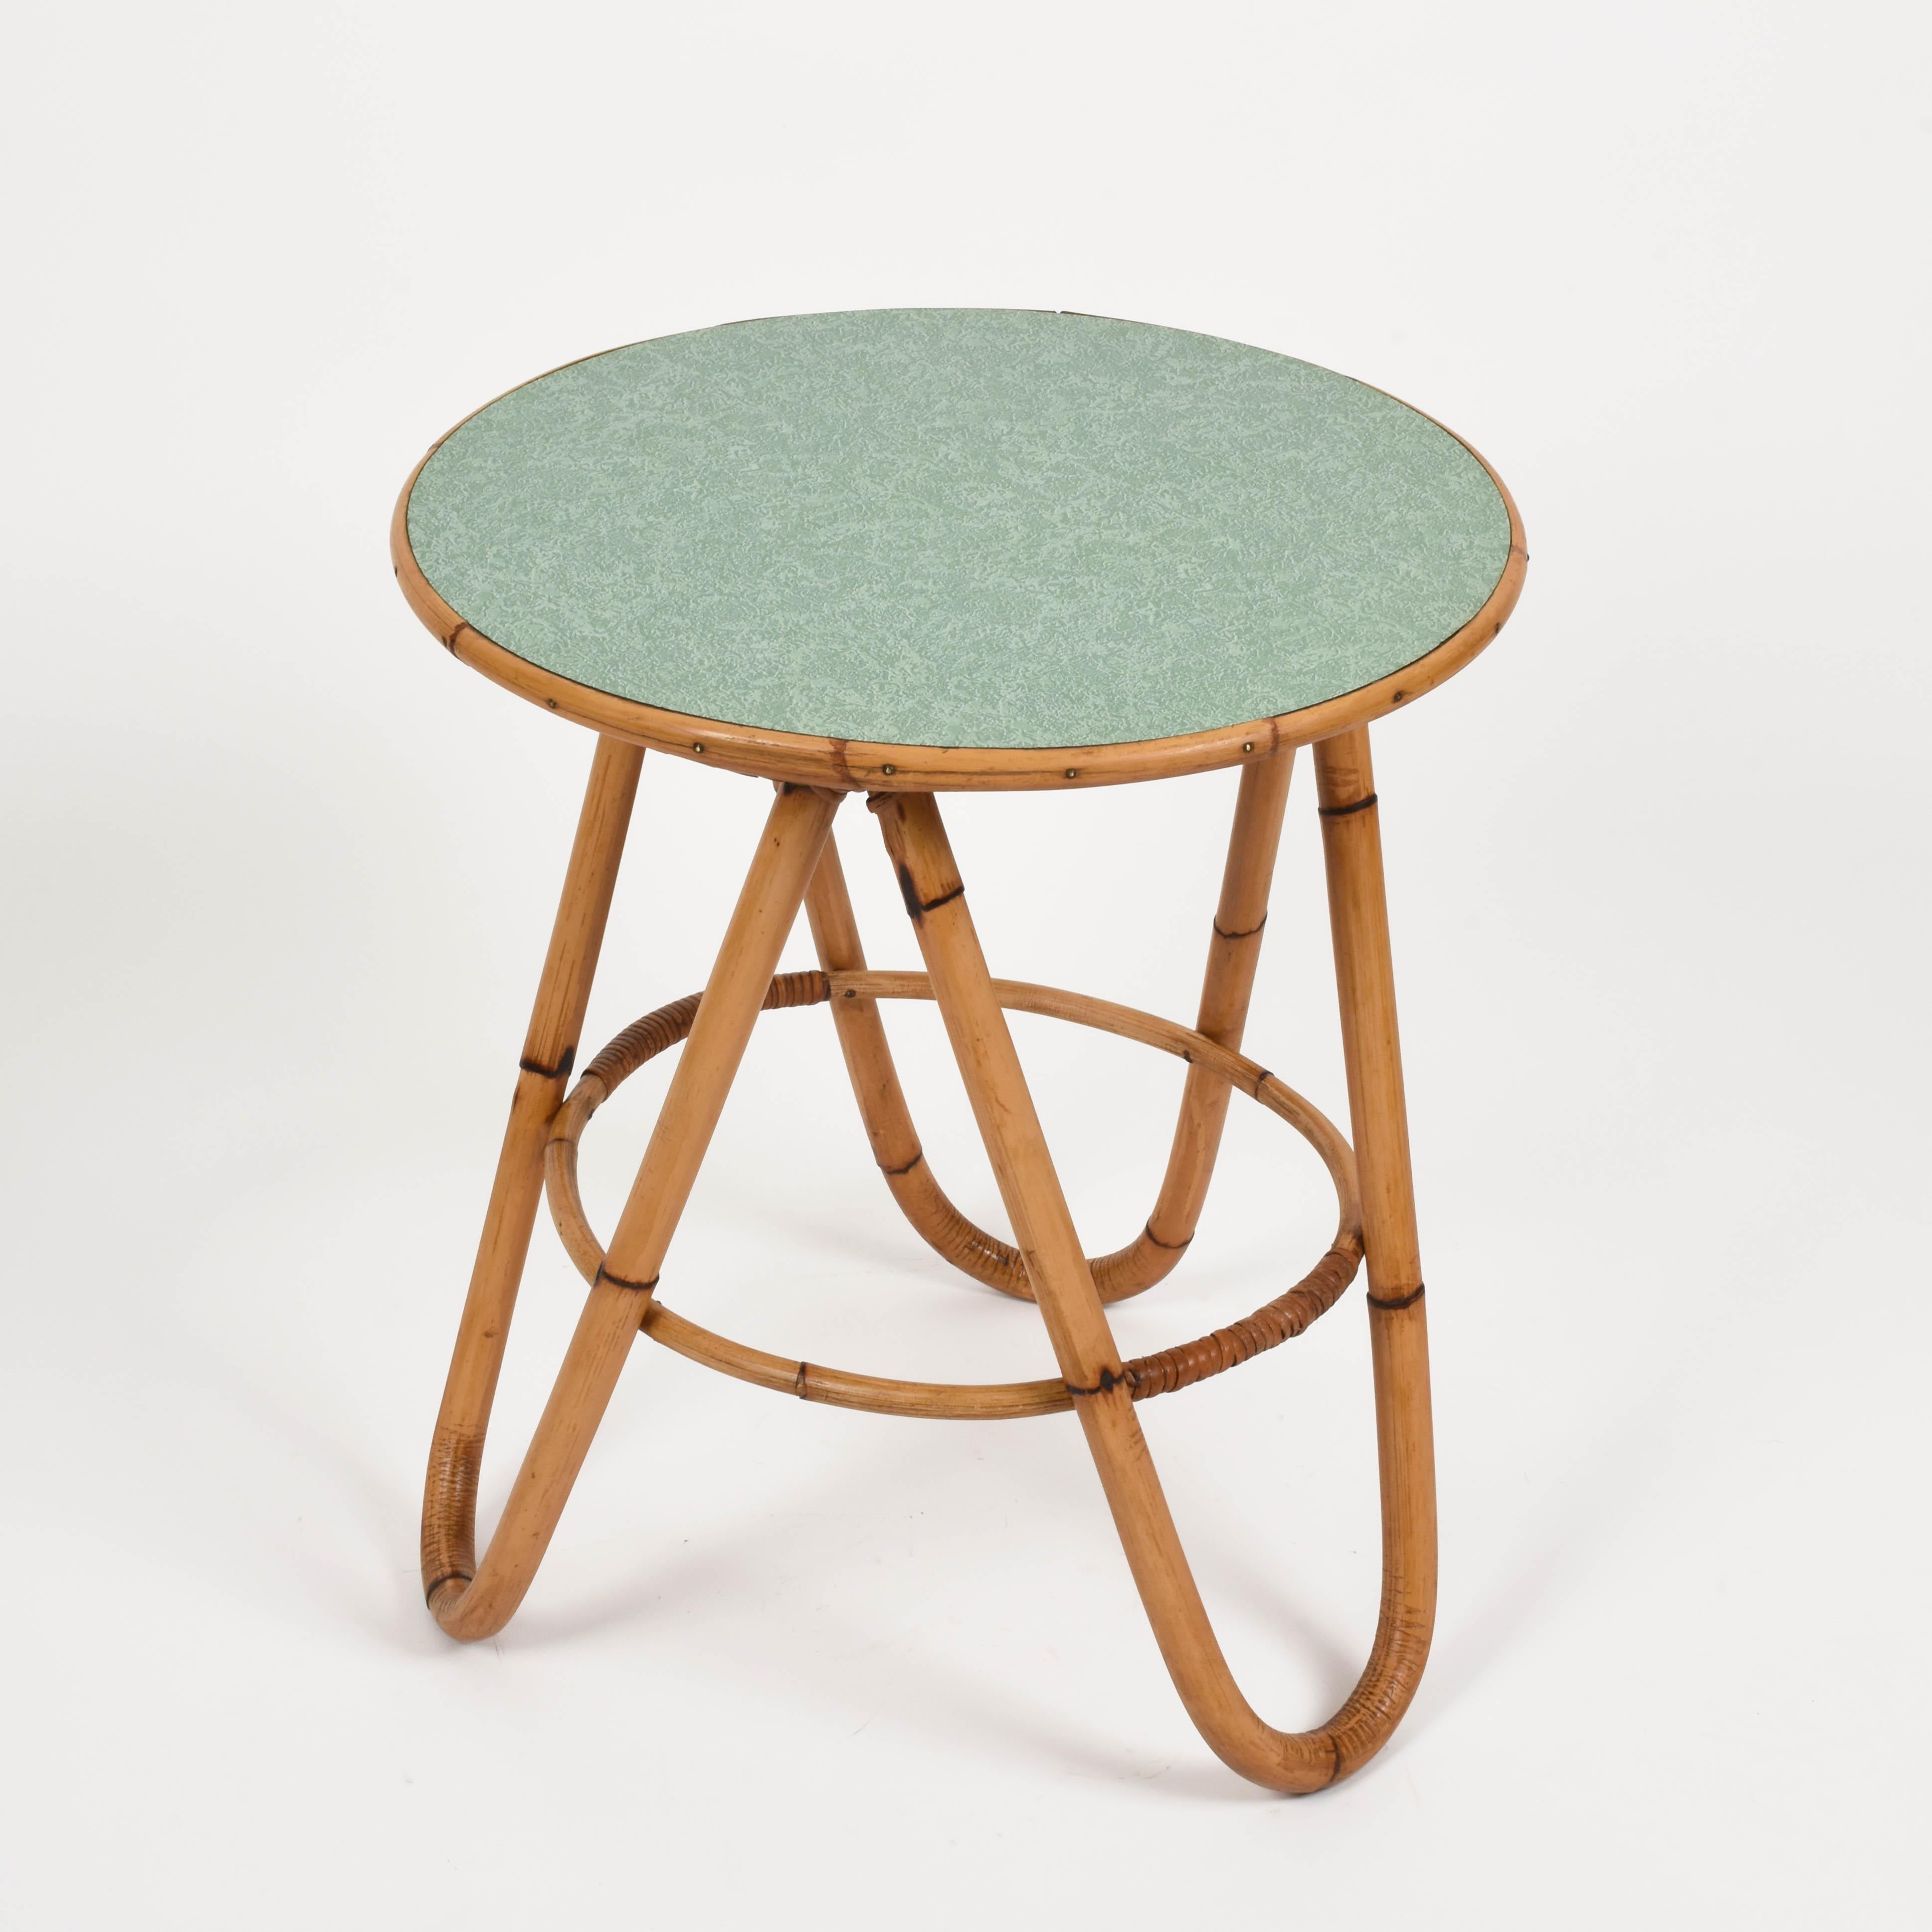 Mid-20th Century Midcentury Bamboo and Green Formica Round Side Italian Coffee Table, 1960s